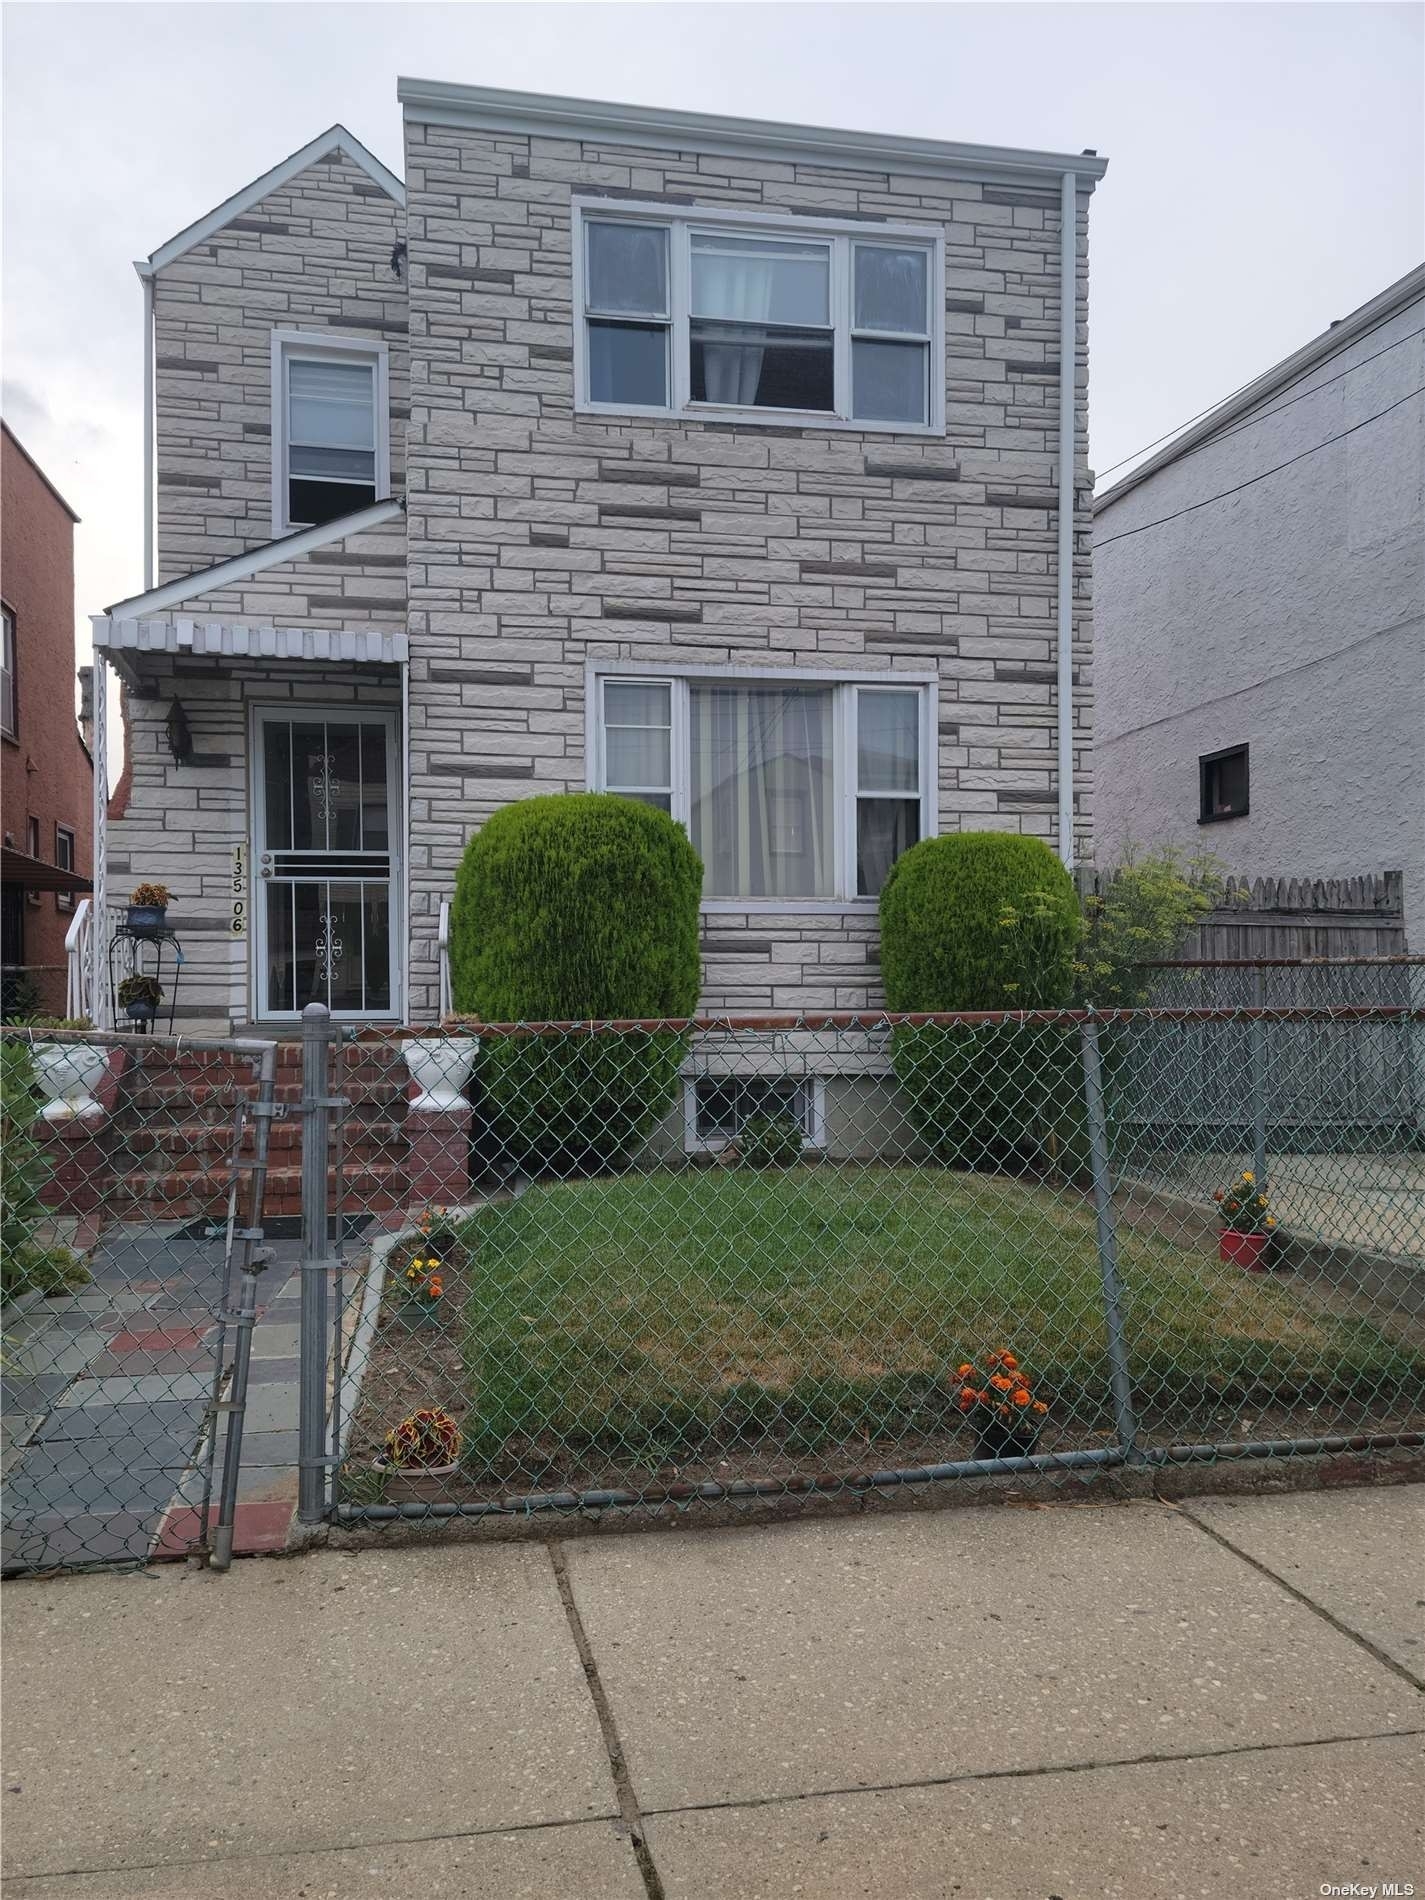 Single Family Home for Sale at Laurelton, Queens, NY 11413